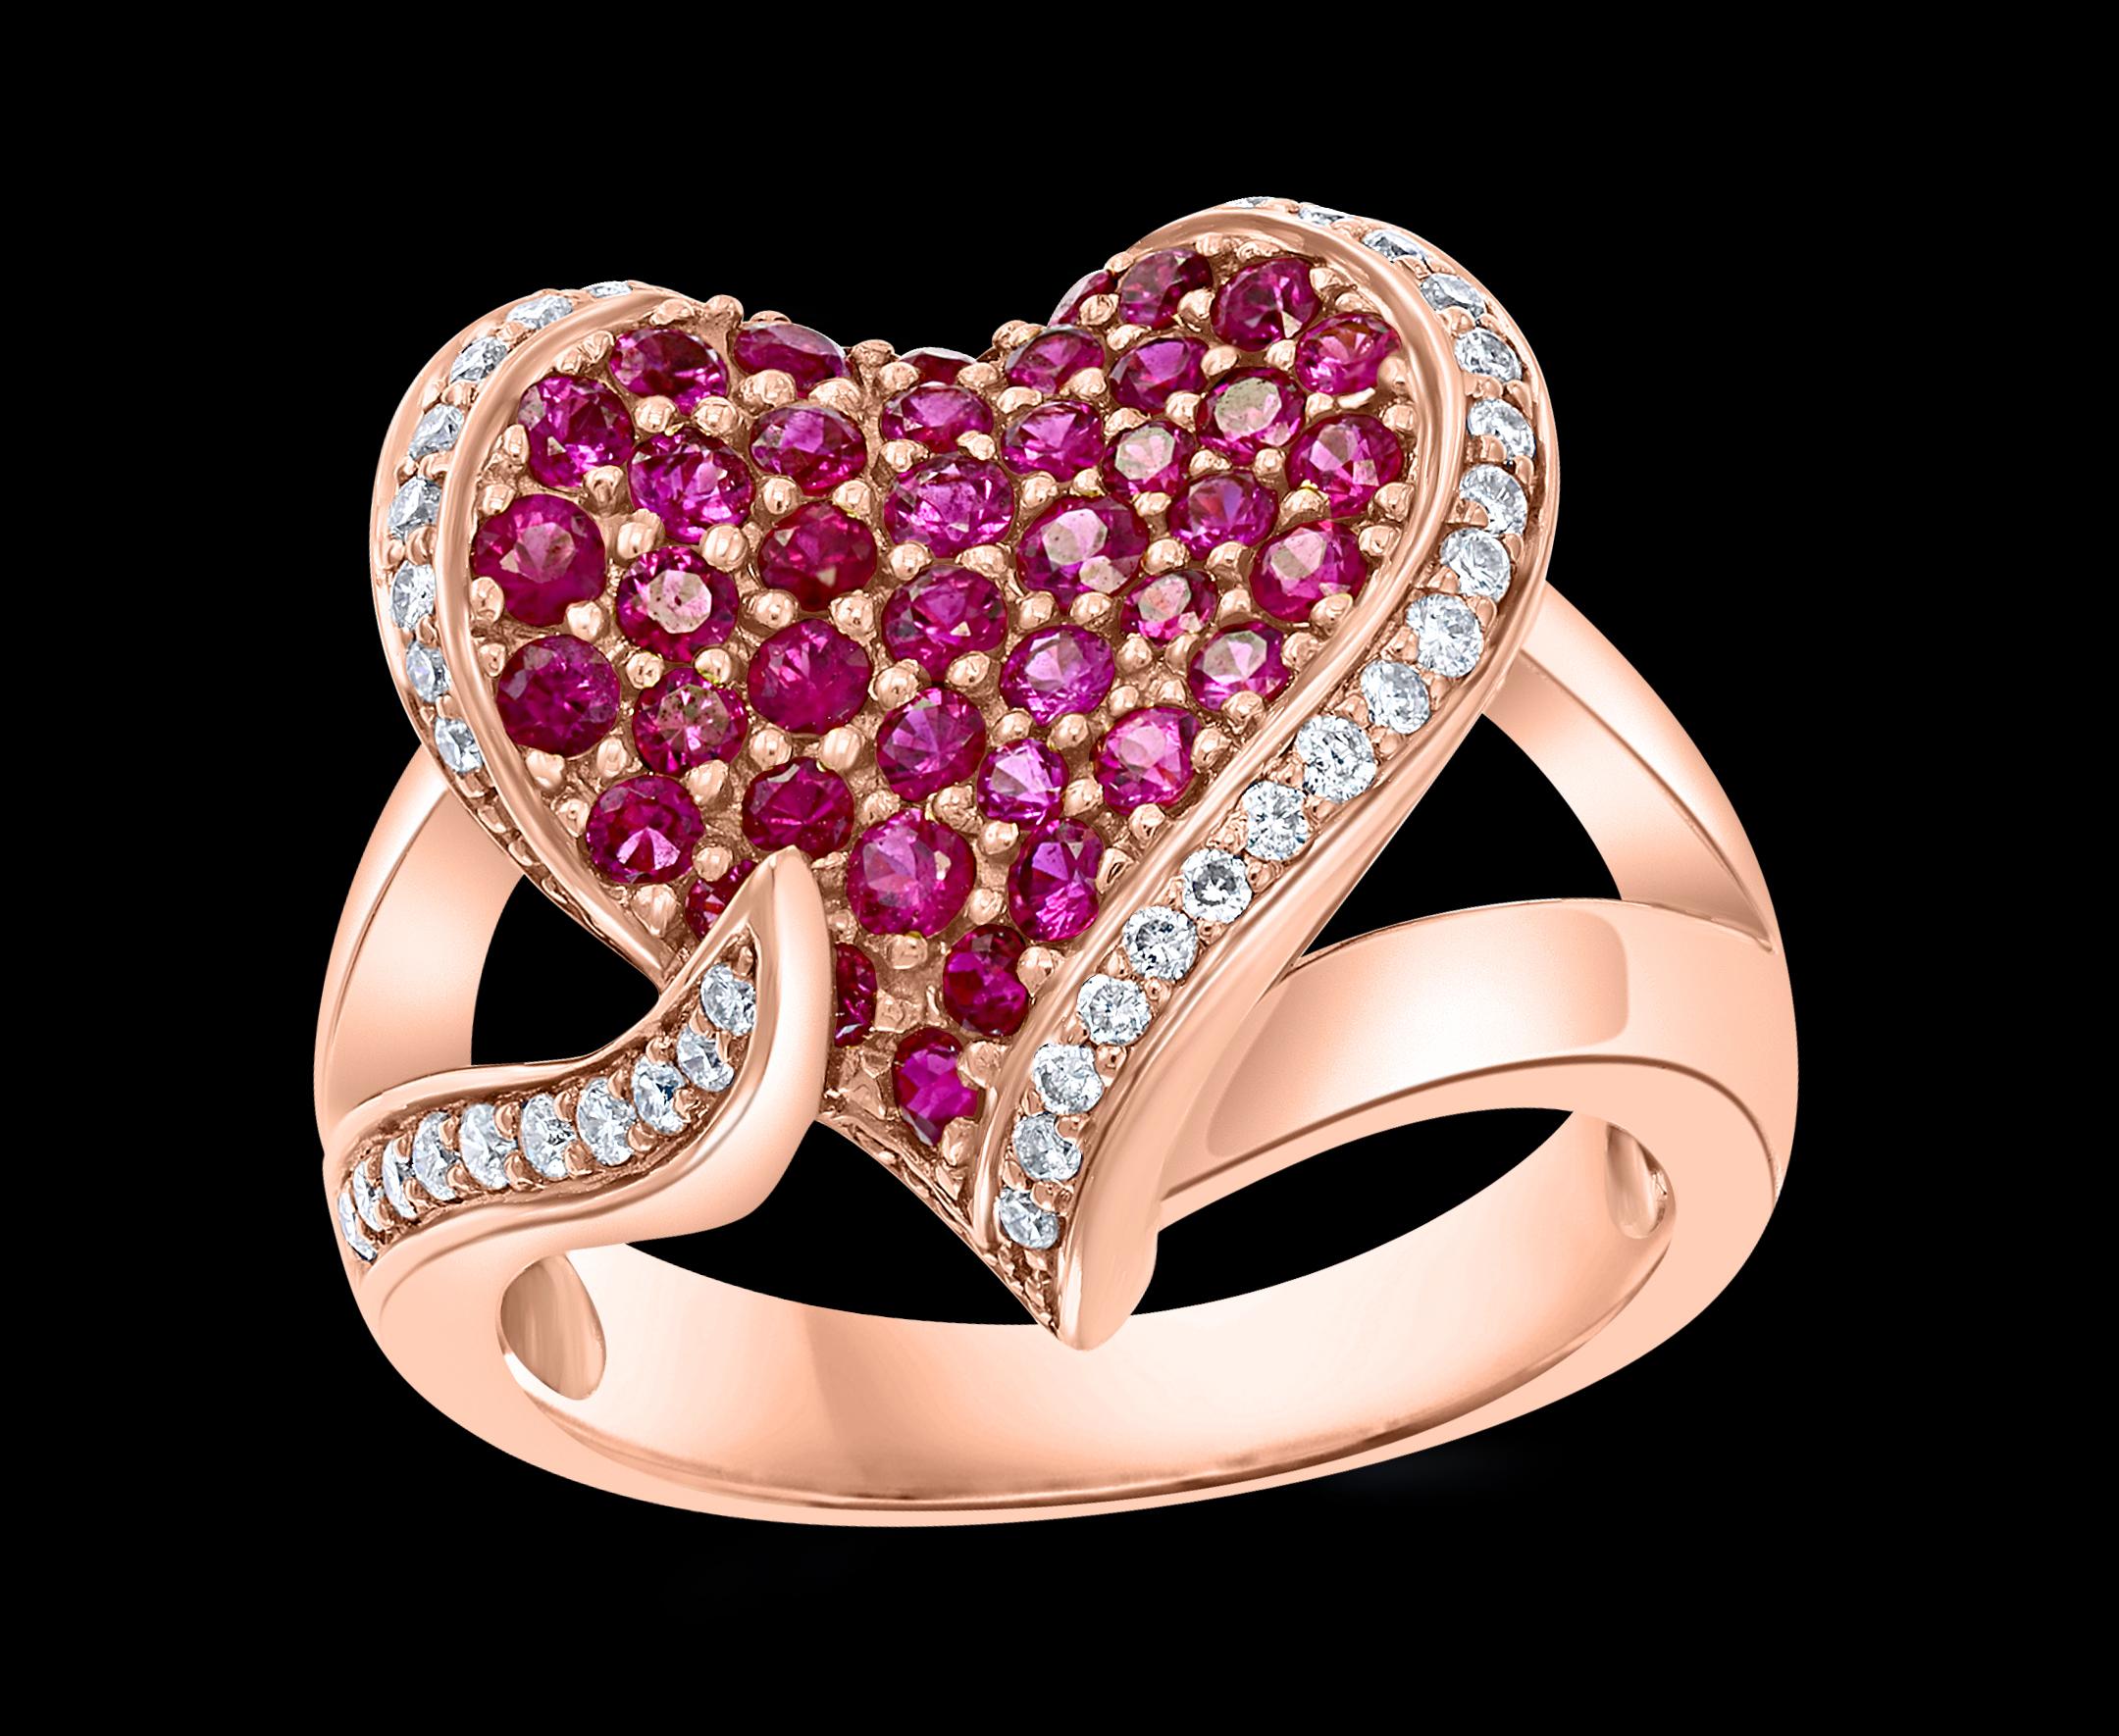 A classic, Cocktail ring 
2 Ct  Ruby & 0.75  Ct  Diamond 18 Karat  Rose Gold Heart Shape  Ring
Ruby  approximately 2 ct
Diamonds   approximately  0,75 ct. All round brilliant cut diamonds
18 Karat Rose Gold: 9.2 Grams
 Stamped  for 750
Ring Size 8 